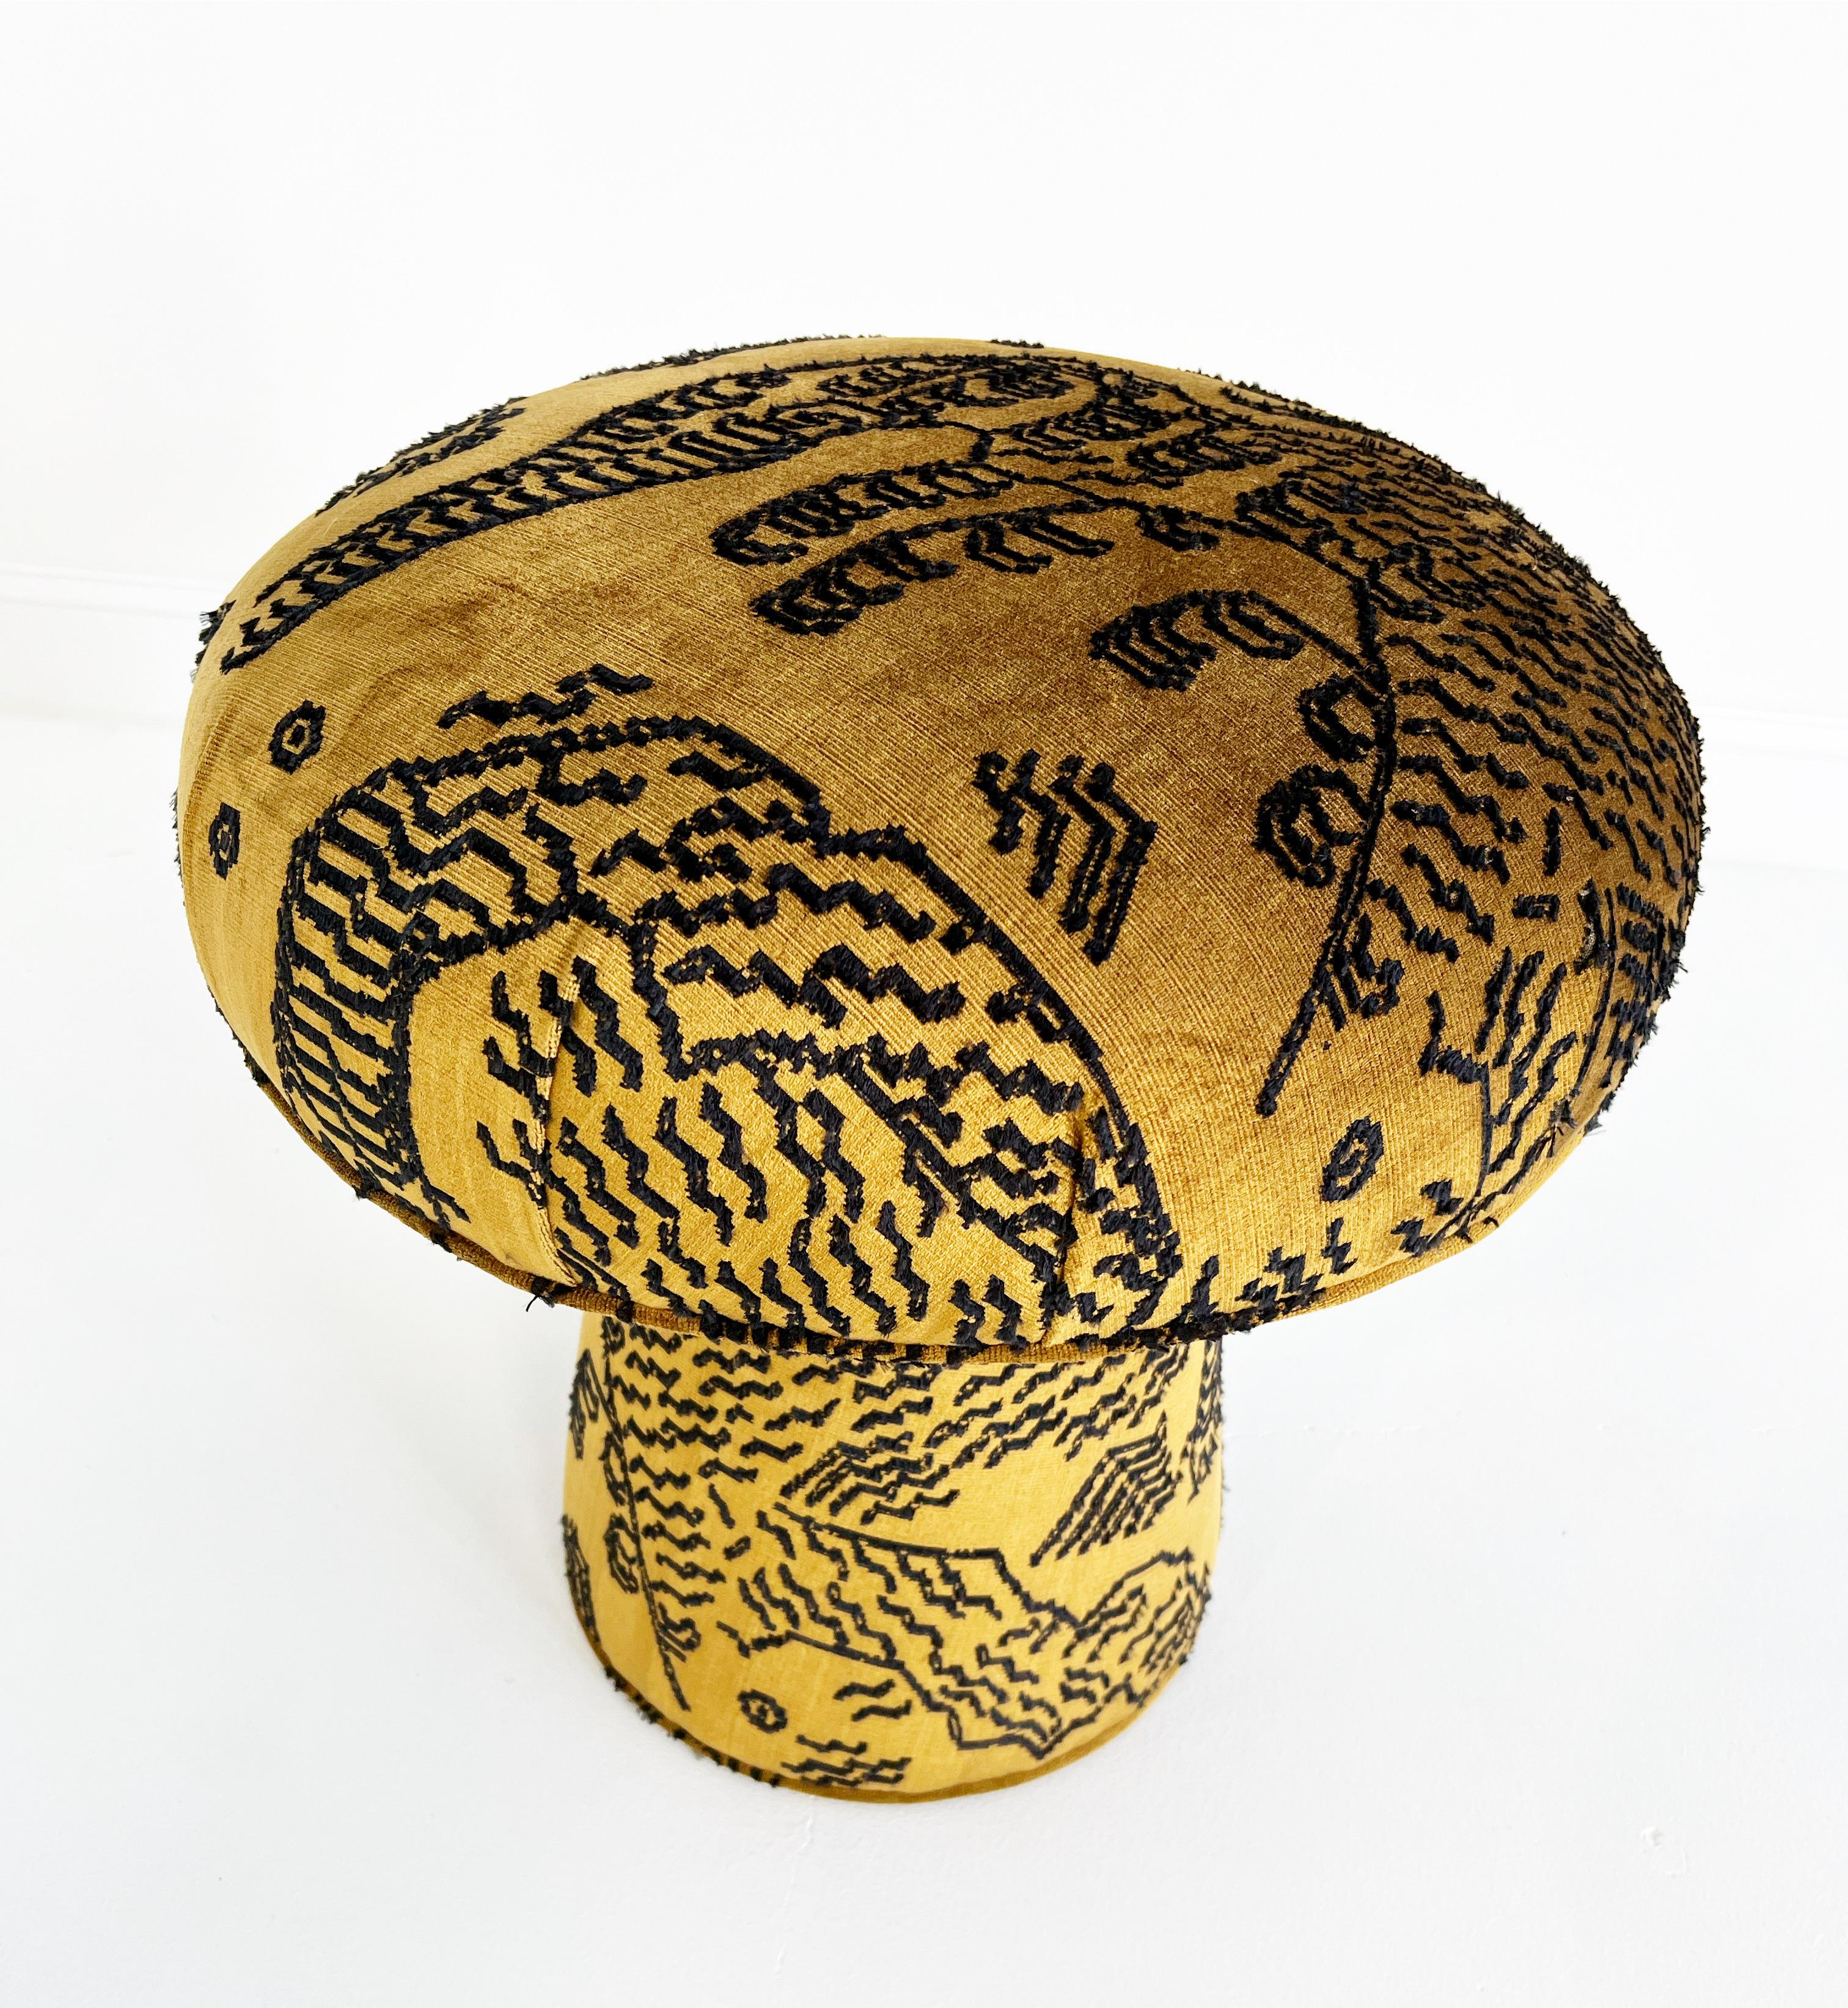 This forsyth mushroom pouf ottoman was created and designed by the Forsyth design team. Each ottoman is handcrafted in Saint Louis. A cute decorative piece for any room adding natural texture and a bit of whimsy. The perfect ottoman or extra seat.